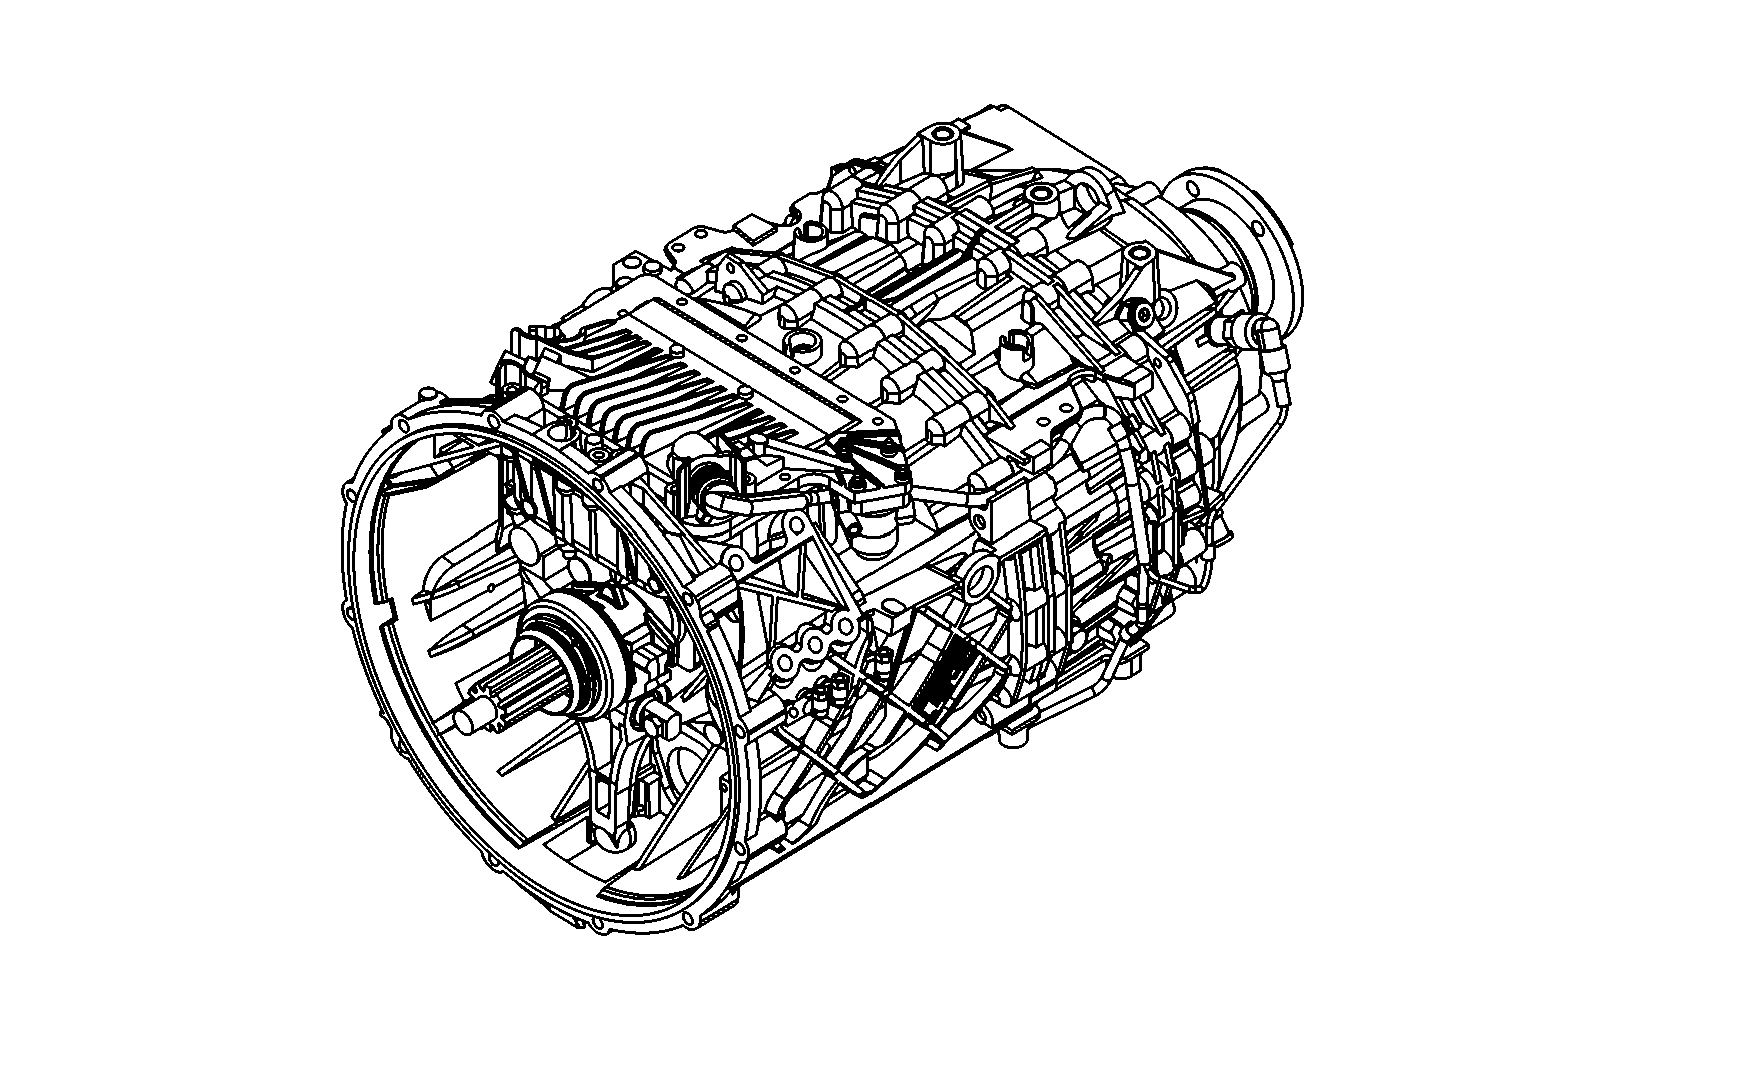 drawing for PREVOST CAR INC. 571772 - 10 AS 2300 BO (figure 1)